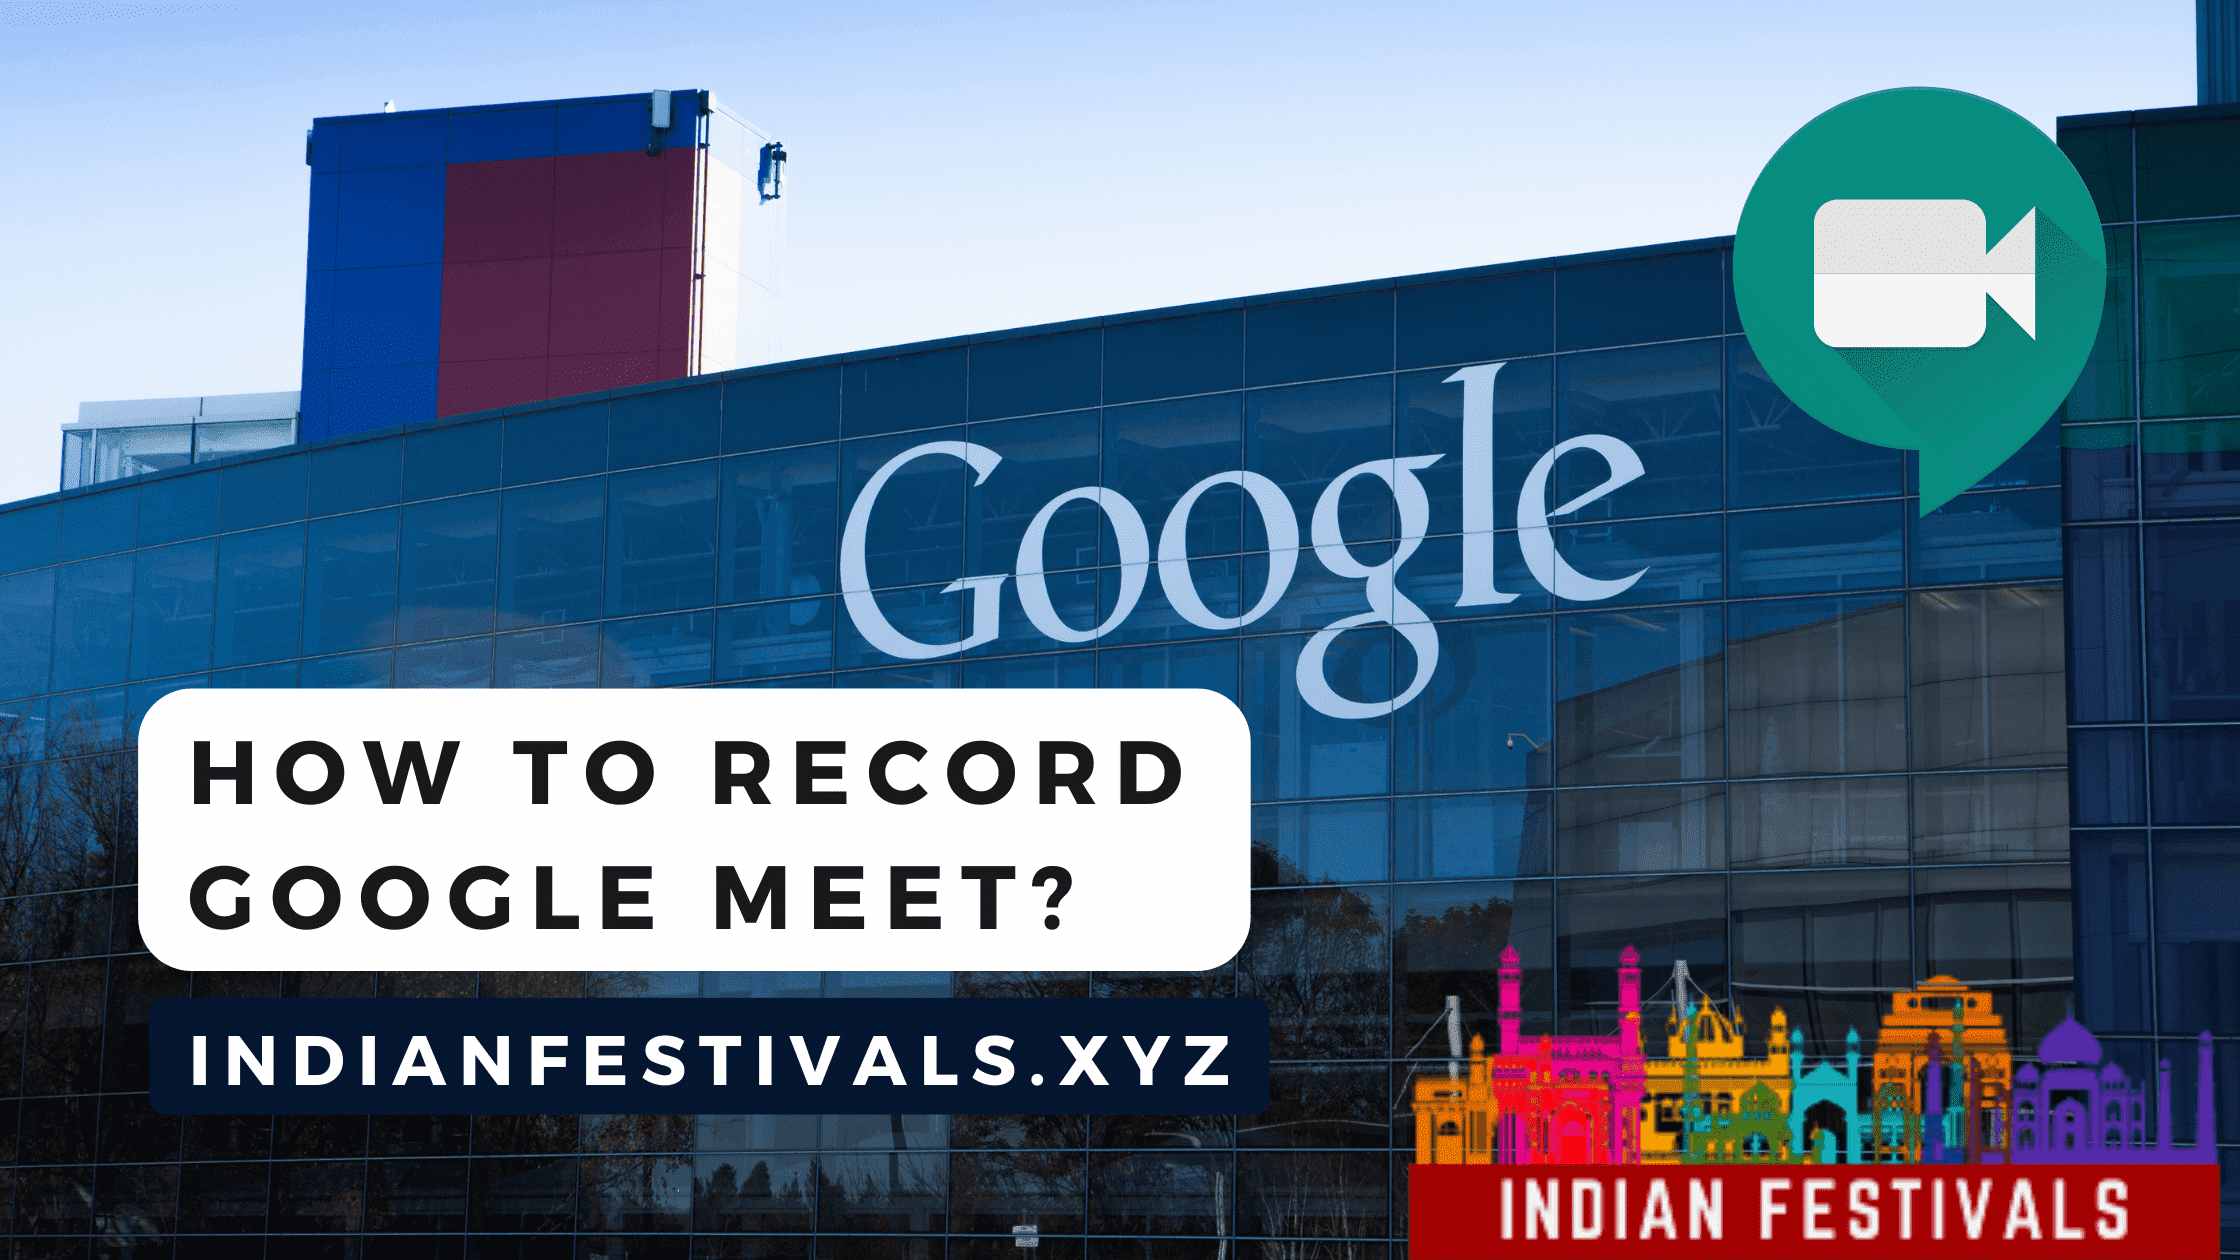 How To Record Google Meet?